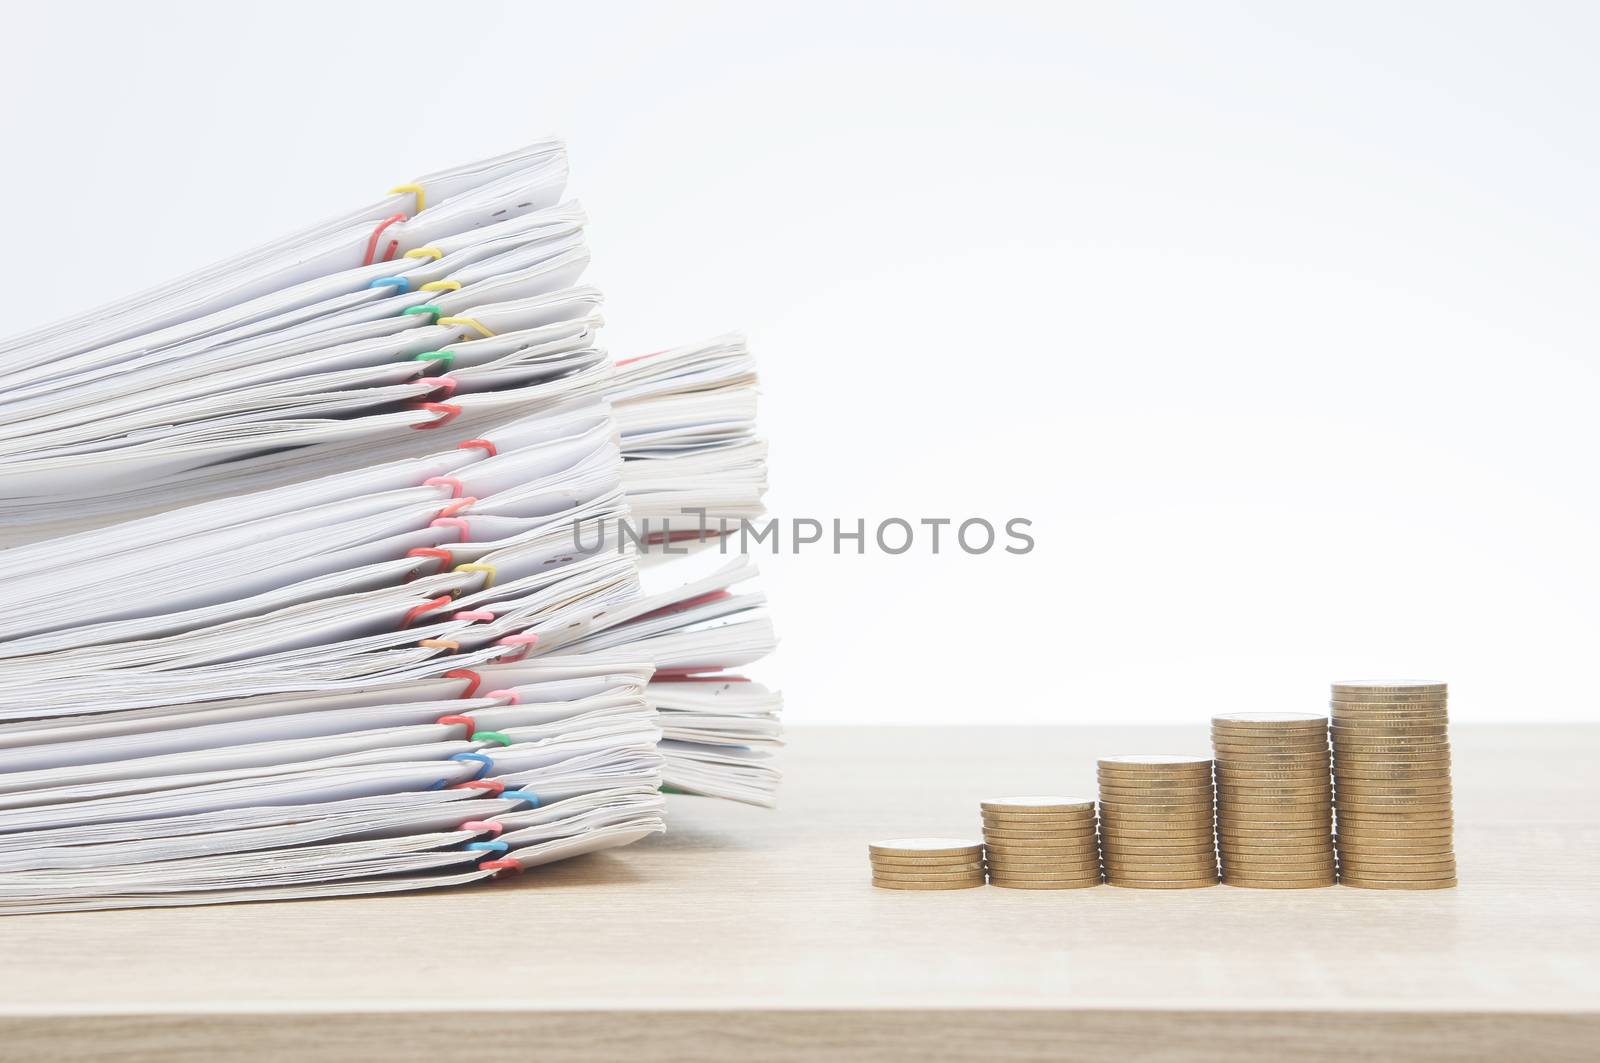 Step pile of gold coins and overload report of sale and receipt with colorful paper clip on wooden table with white background and copy space. Business and finance concept rich and successful photo.